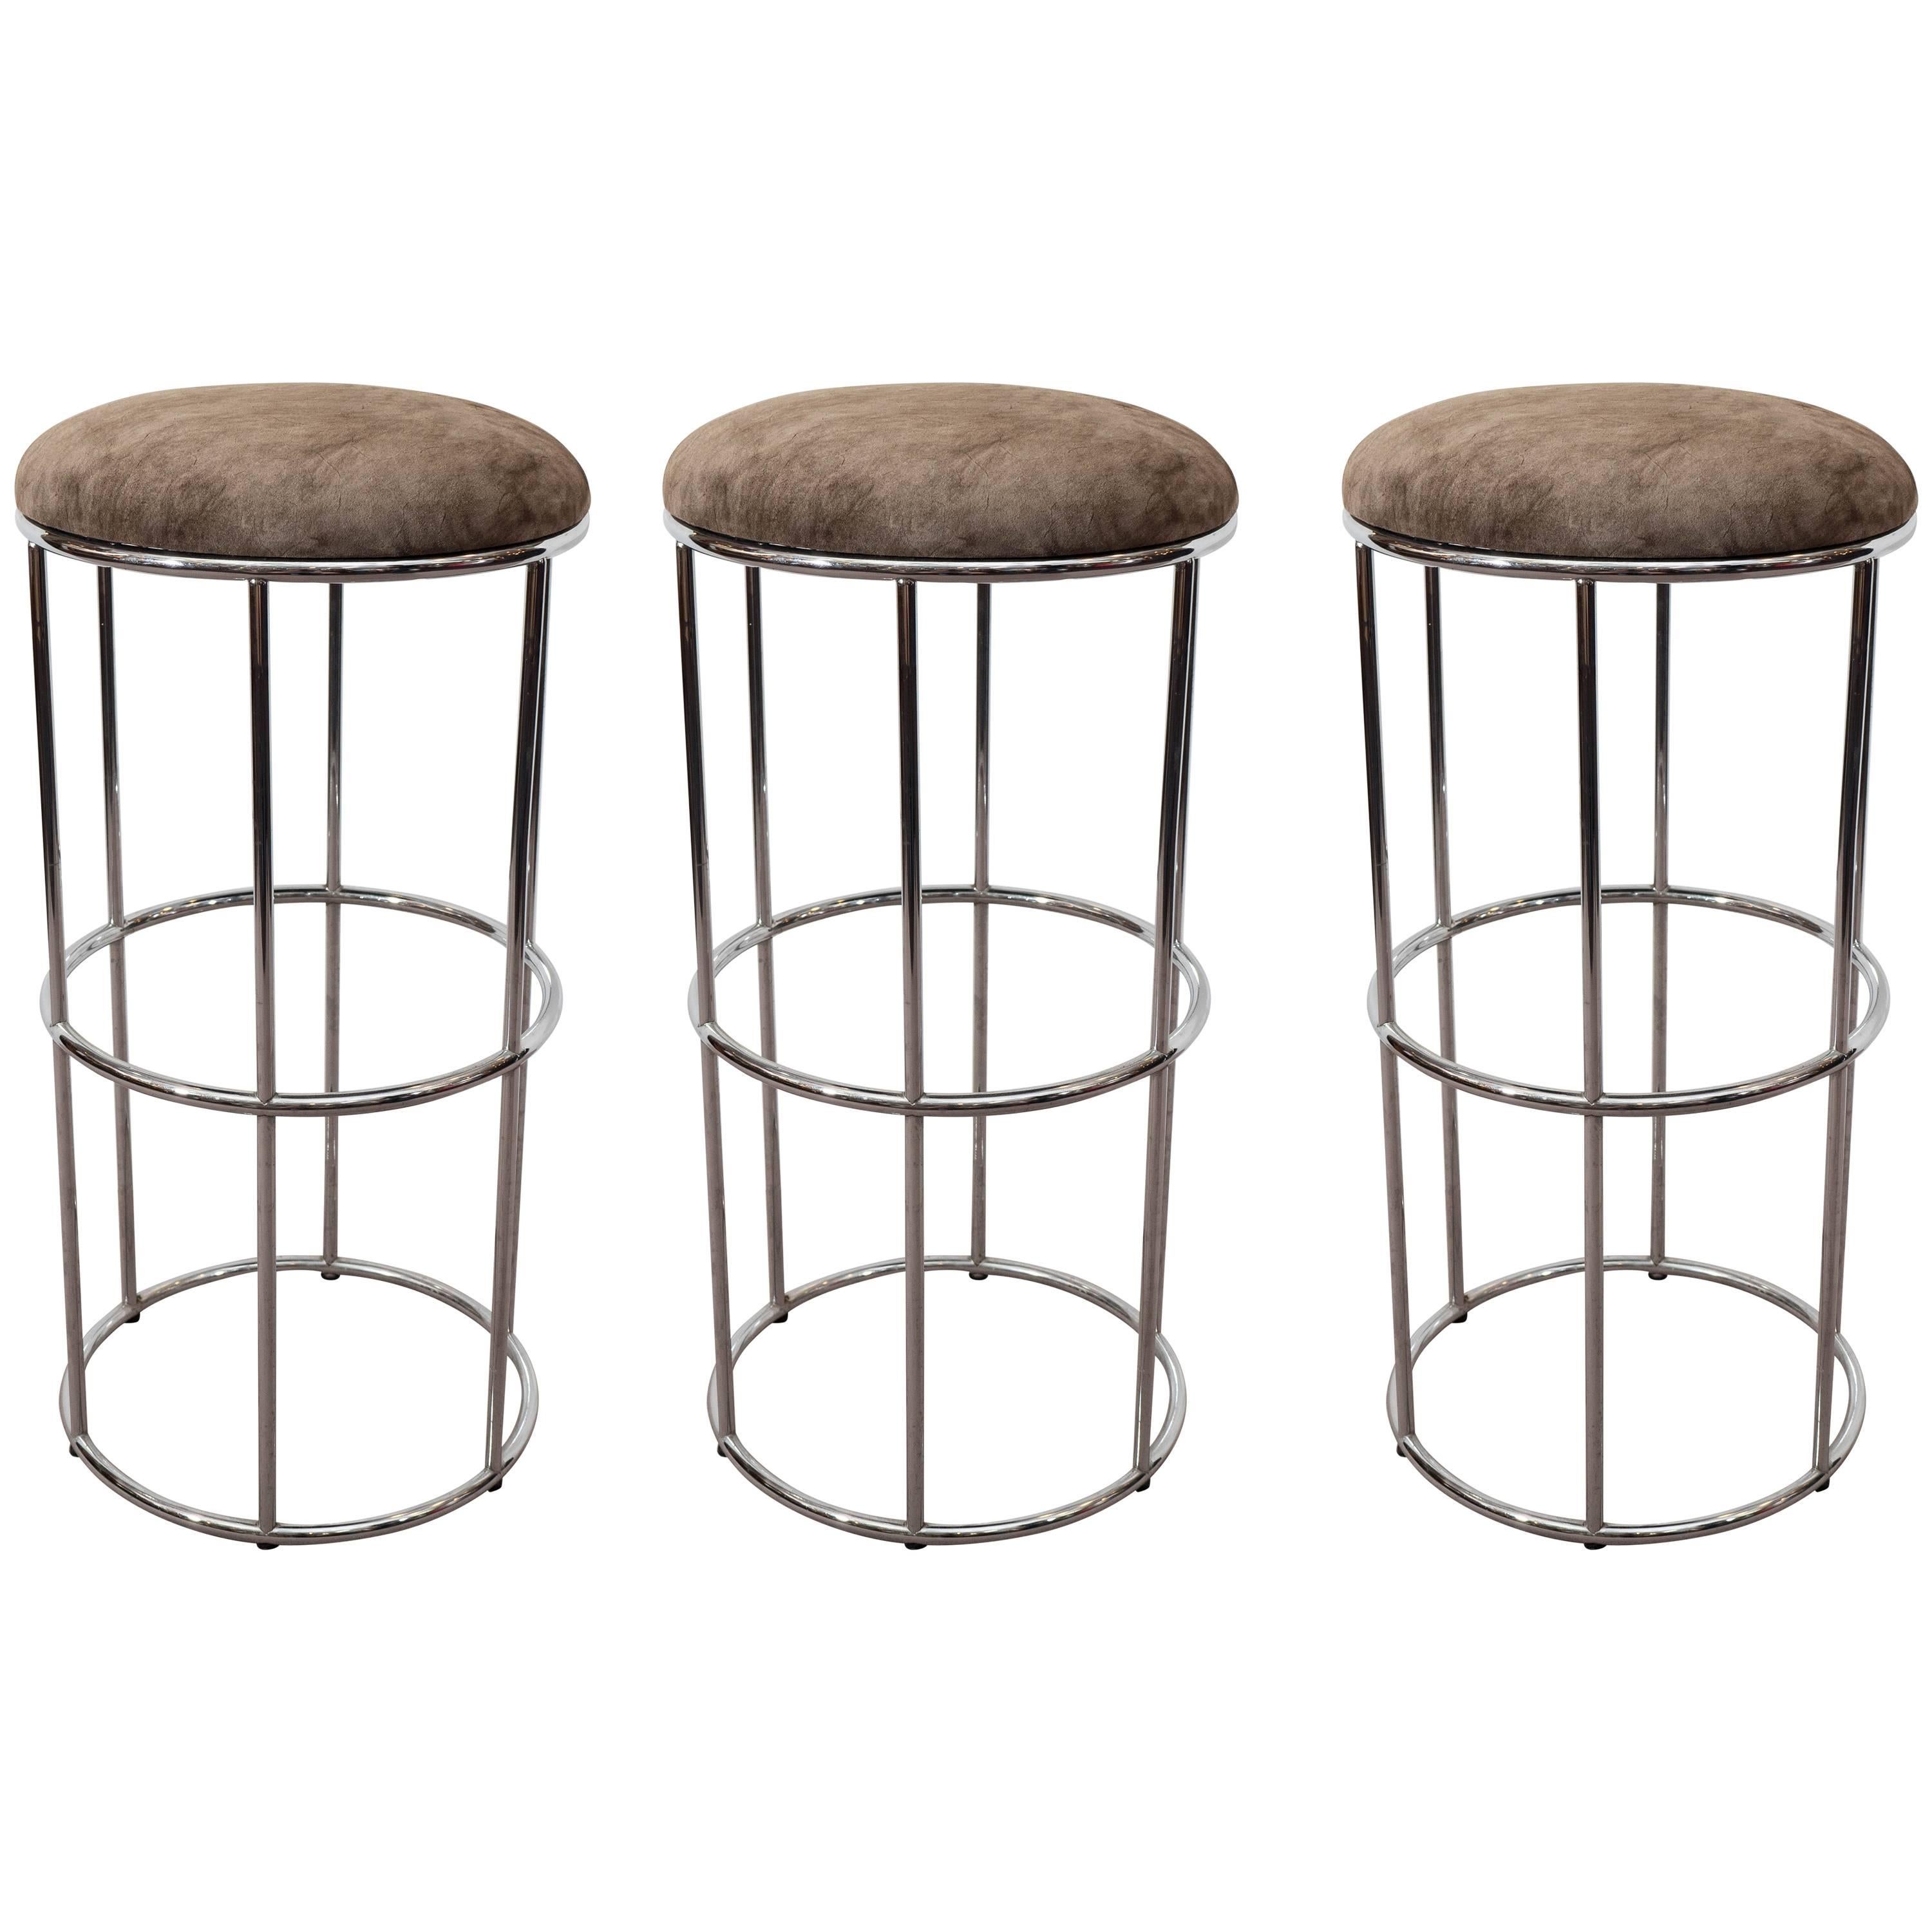 Set of Three Mid-Century Round Chrome and Suede Barstools with Tubular Legs